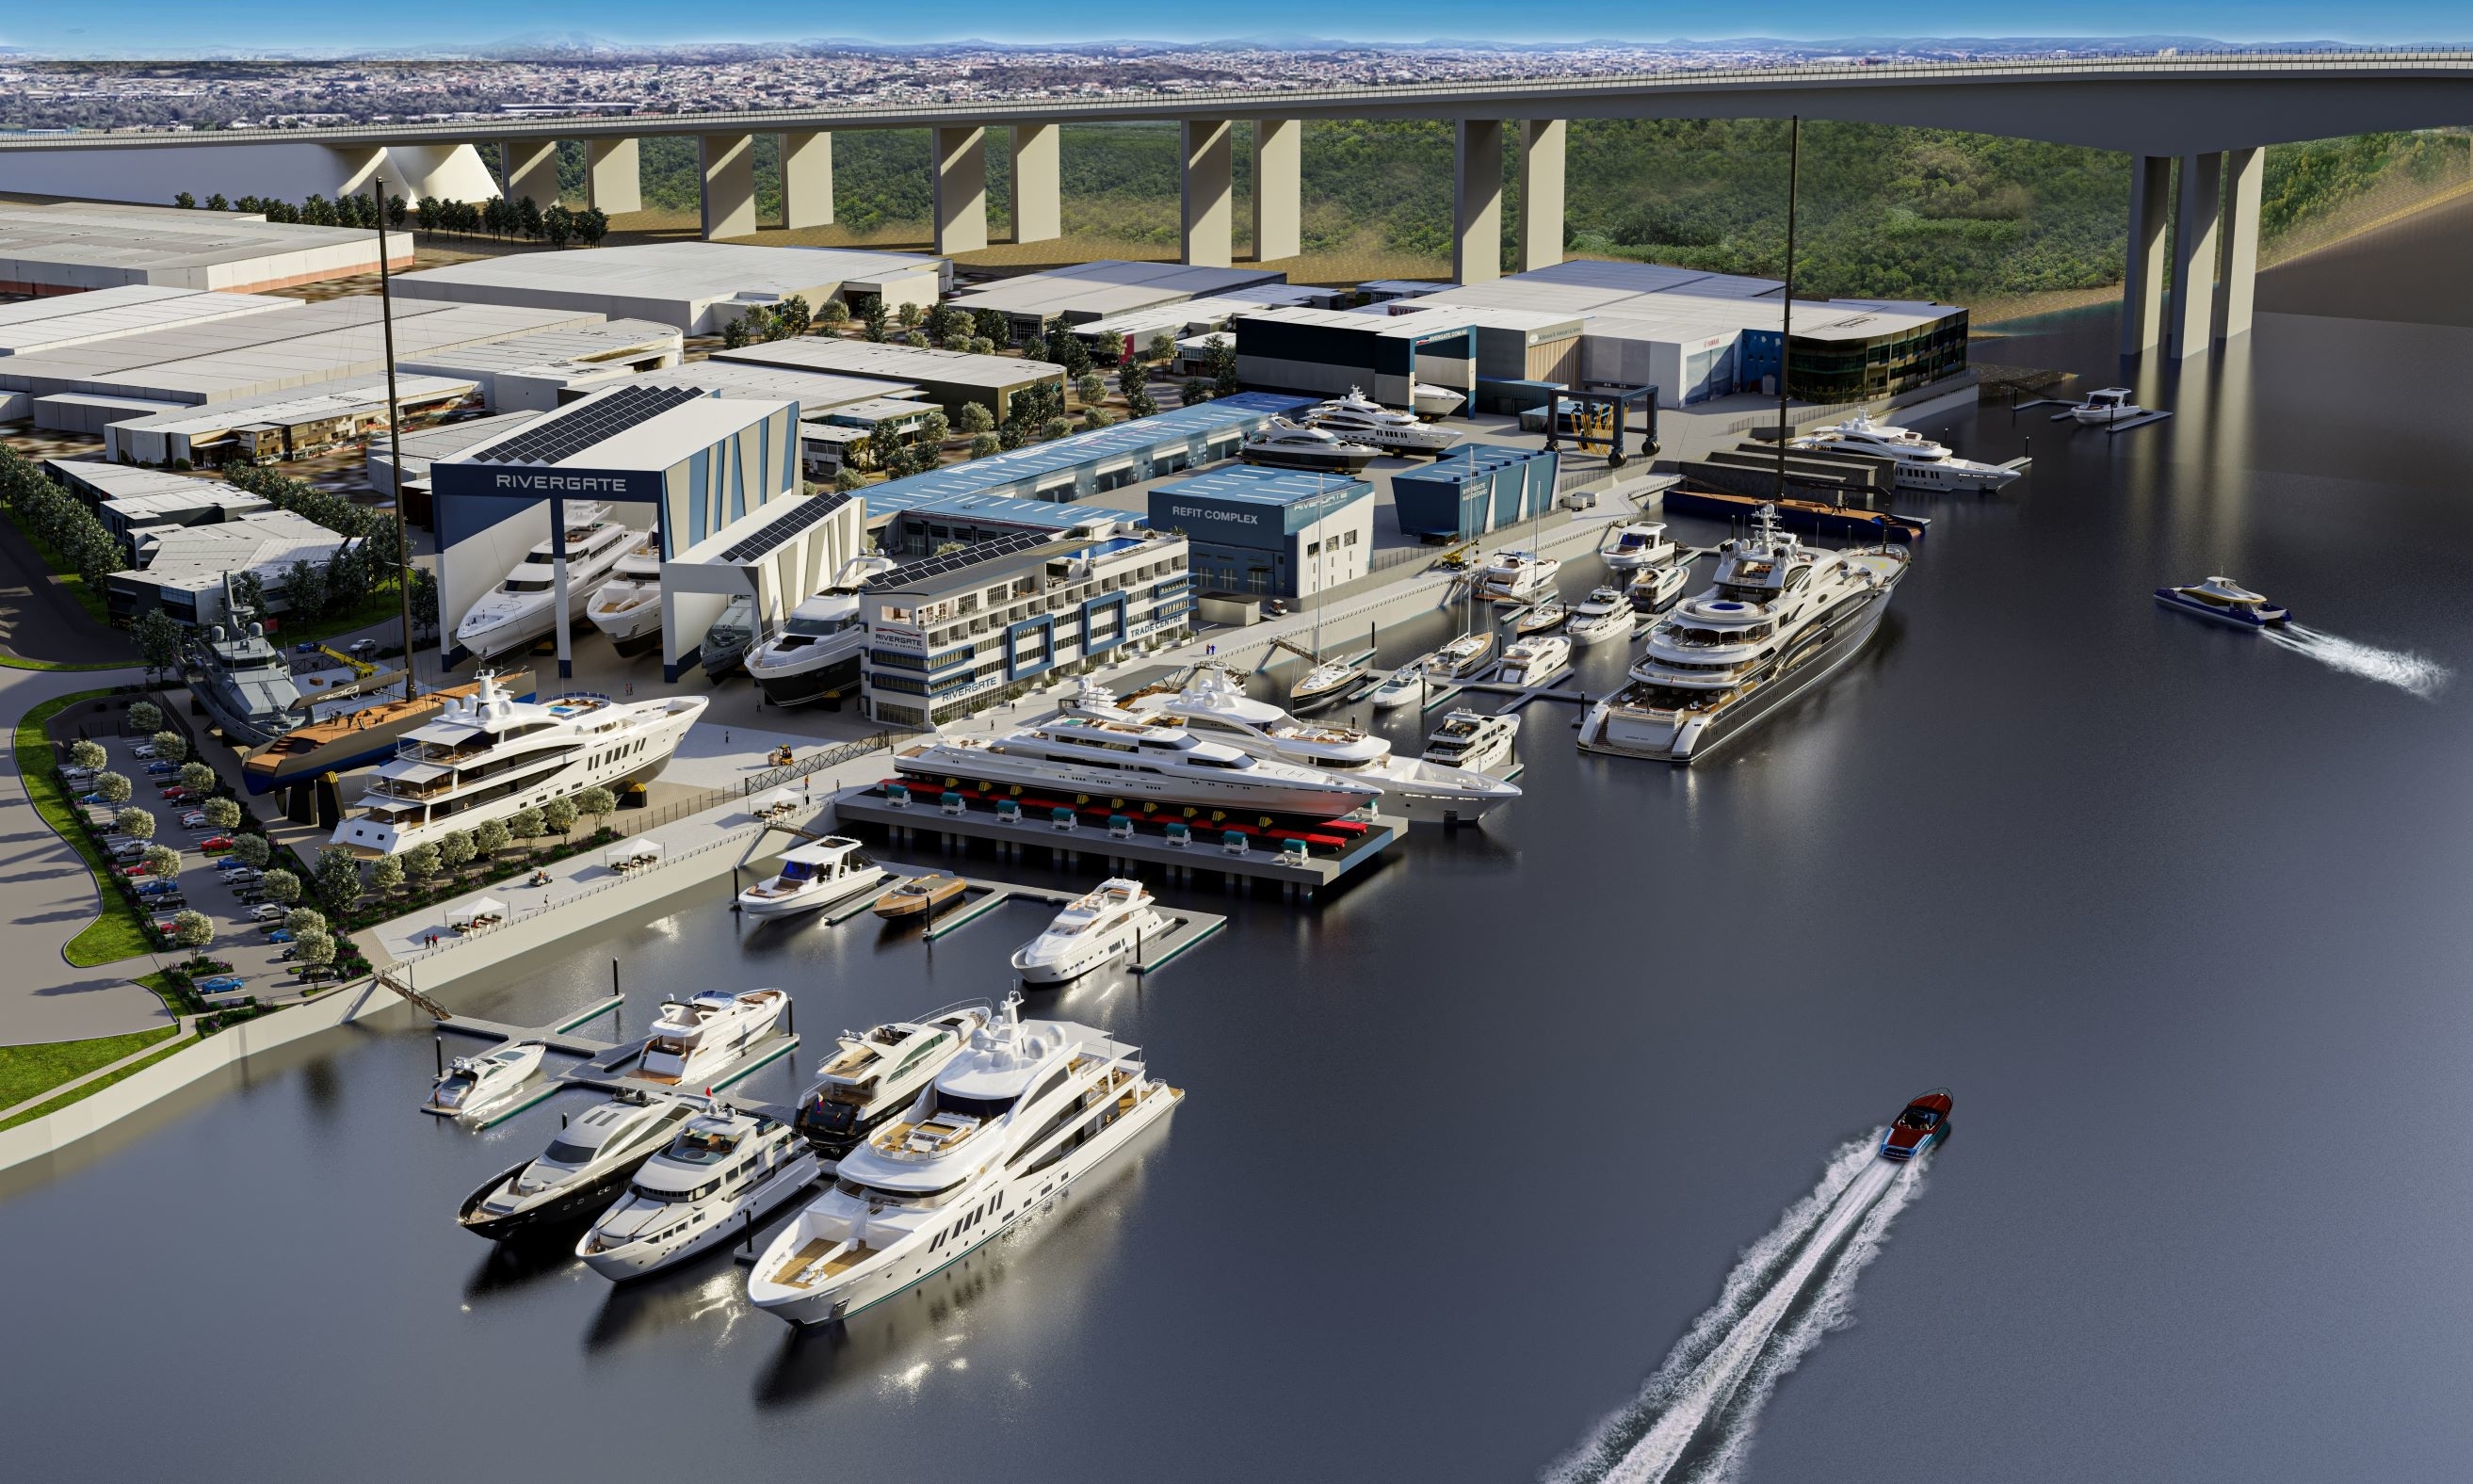 Rivergate Marina and Shipyard receive council approval for $200m expansion